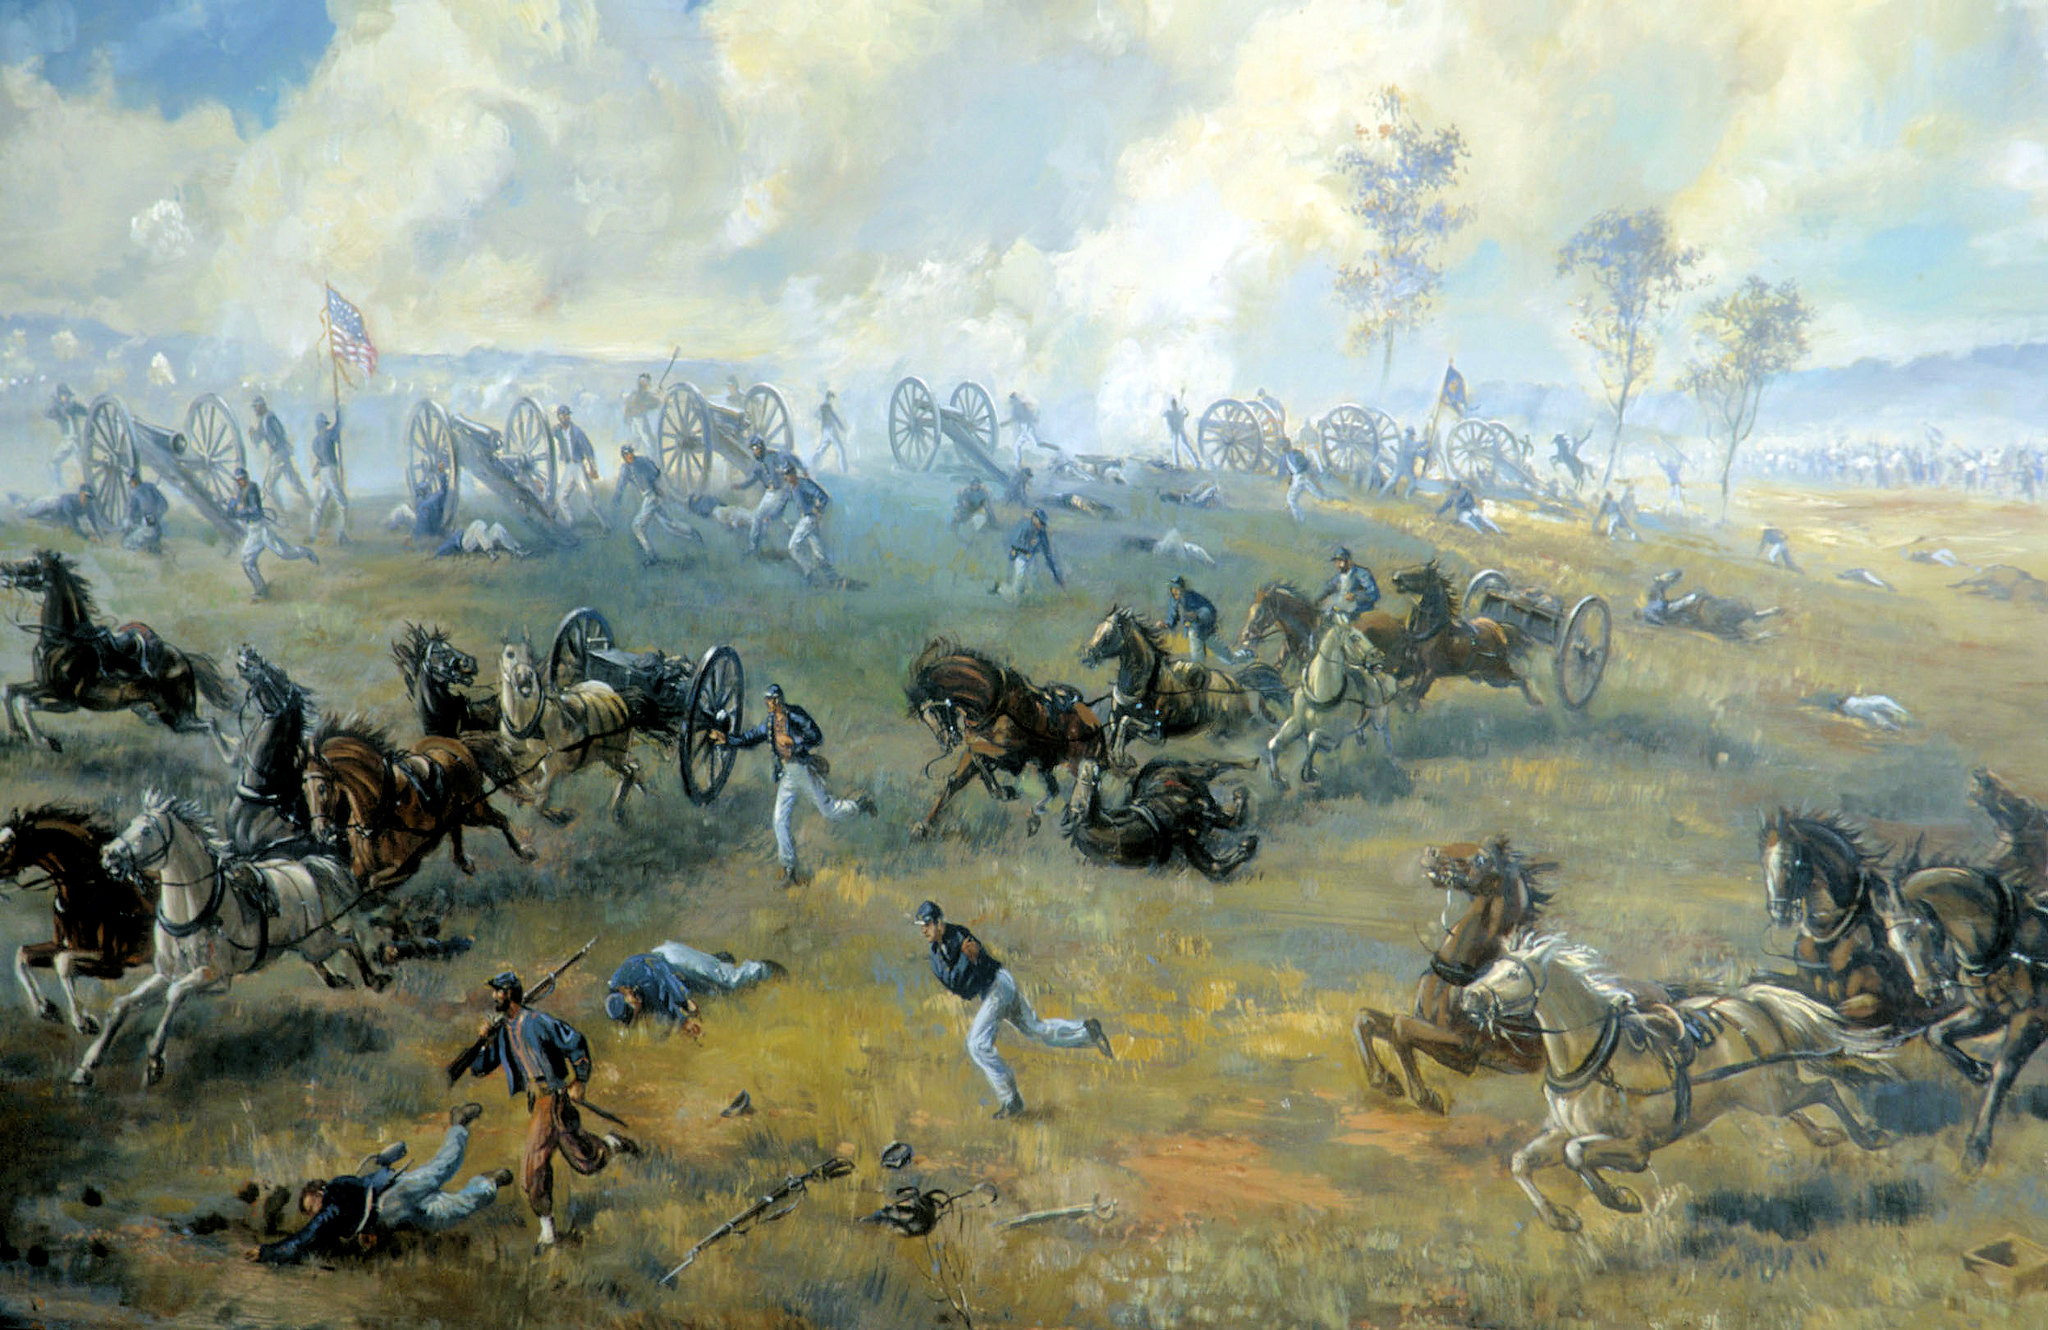 The painting Capture of Ricketts' Battery, depicting action during the First Battle of Bull Run, one of the early battles in the American Civil War. The painting is oil on plywood, and is displayed in the Henry Hill Visitor Center at Manassas National Battlefield Park.